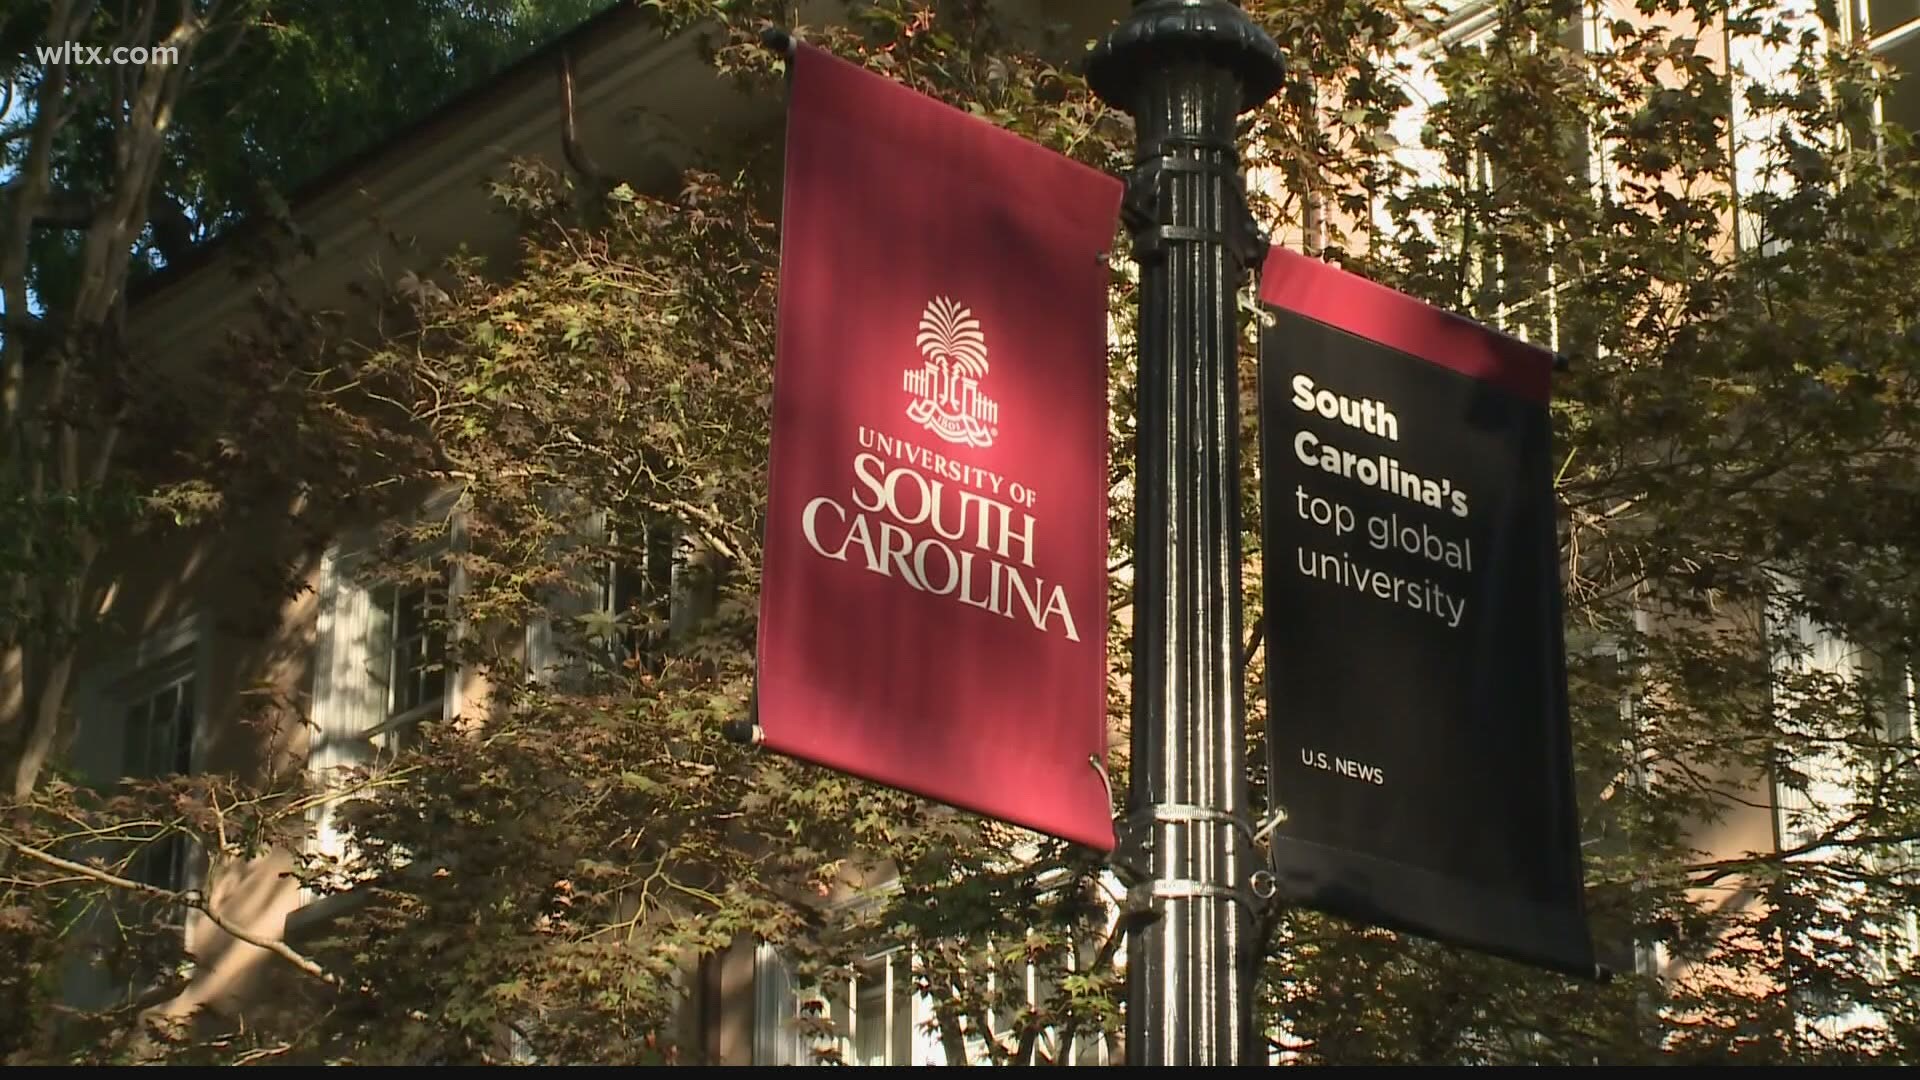 The University of South Carolna has two forums to discuss the issue. This comes as part of a growing movement to rename buildings after controversial figures.